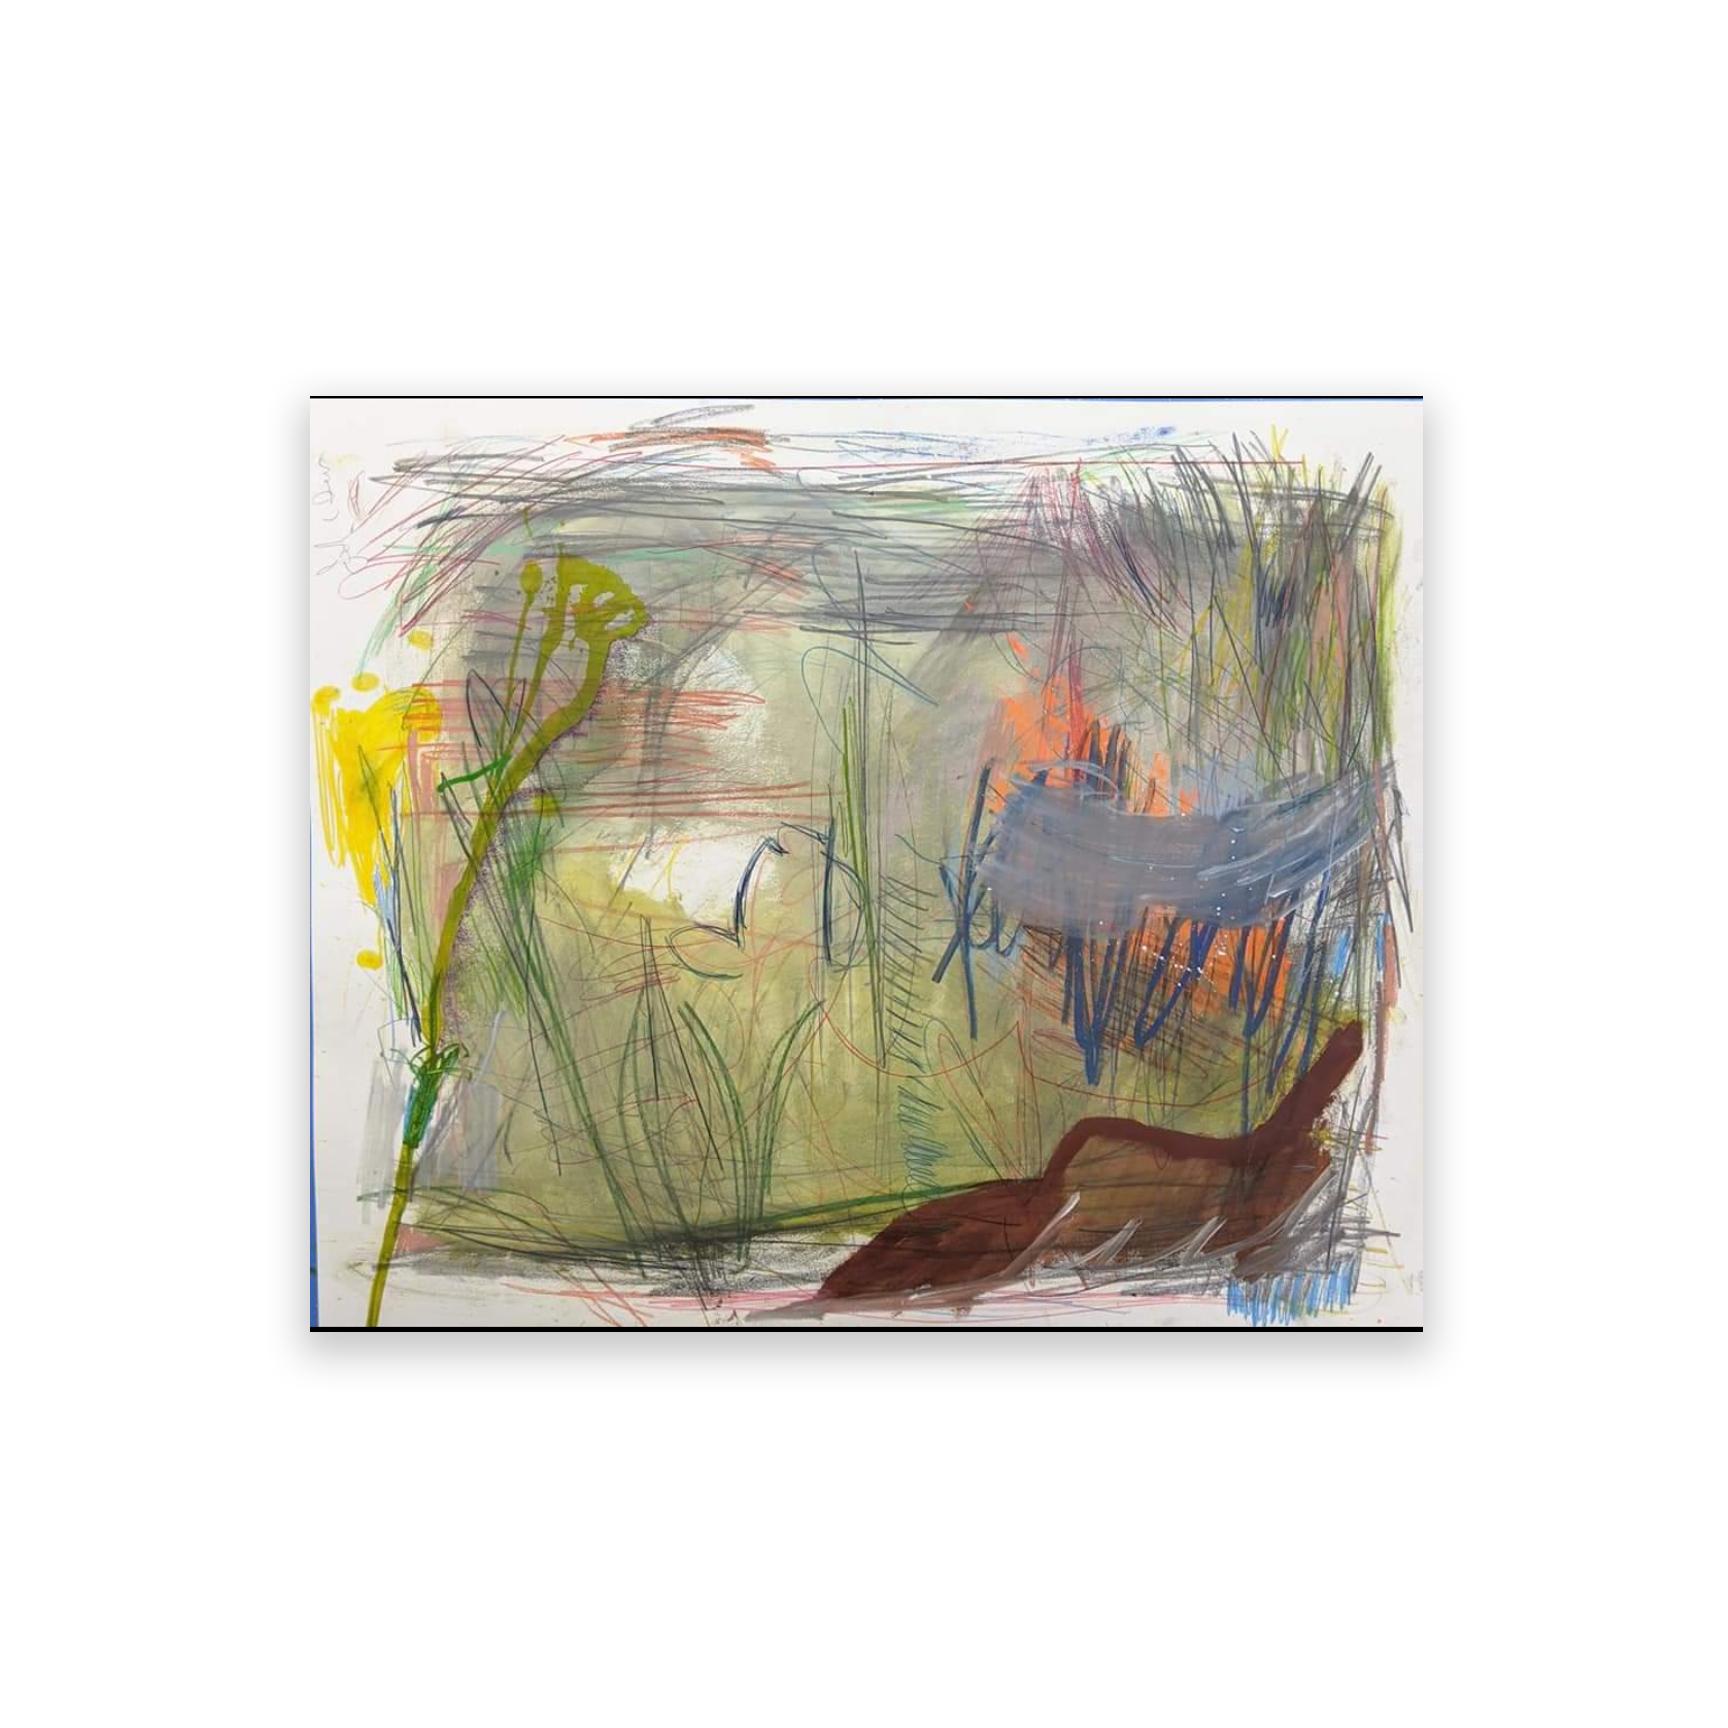 Le Jardin acadamy by Joseph Conrad-Ferm, 2020
Mixed Media 
47.5 × 54 in
120.7 × 137.2 cm

Mixed media abstract painting on watercolor paper by NY-based artist Joseph Conrad-Ferm. 

Shipping is not included. See our shipping policies. Please contact